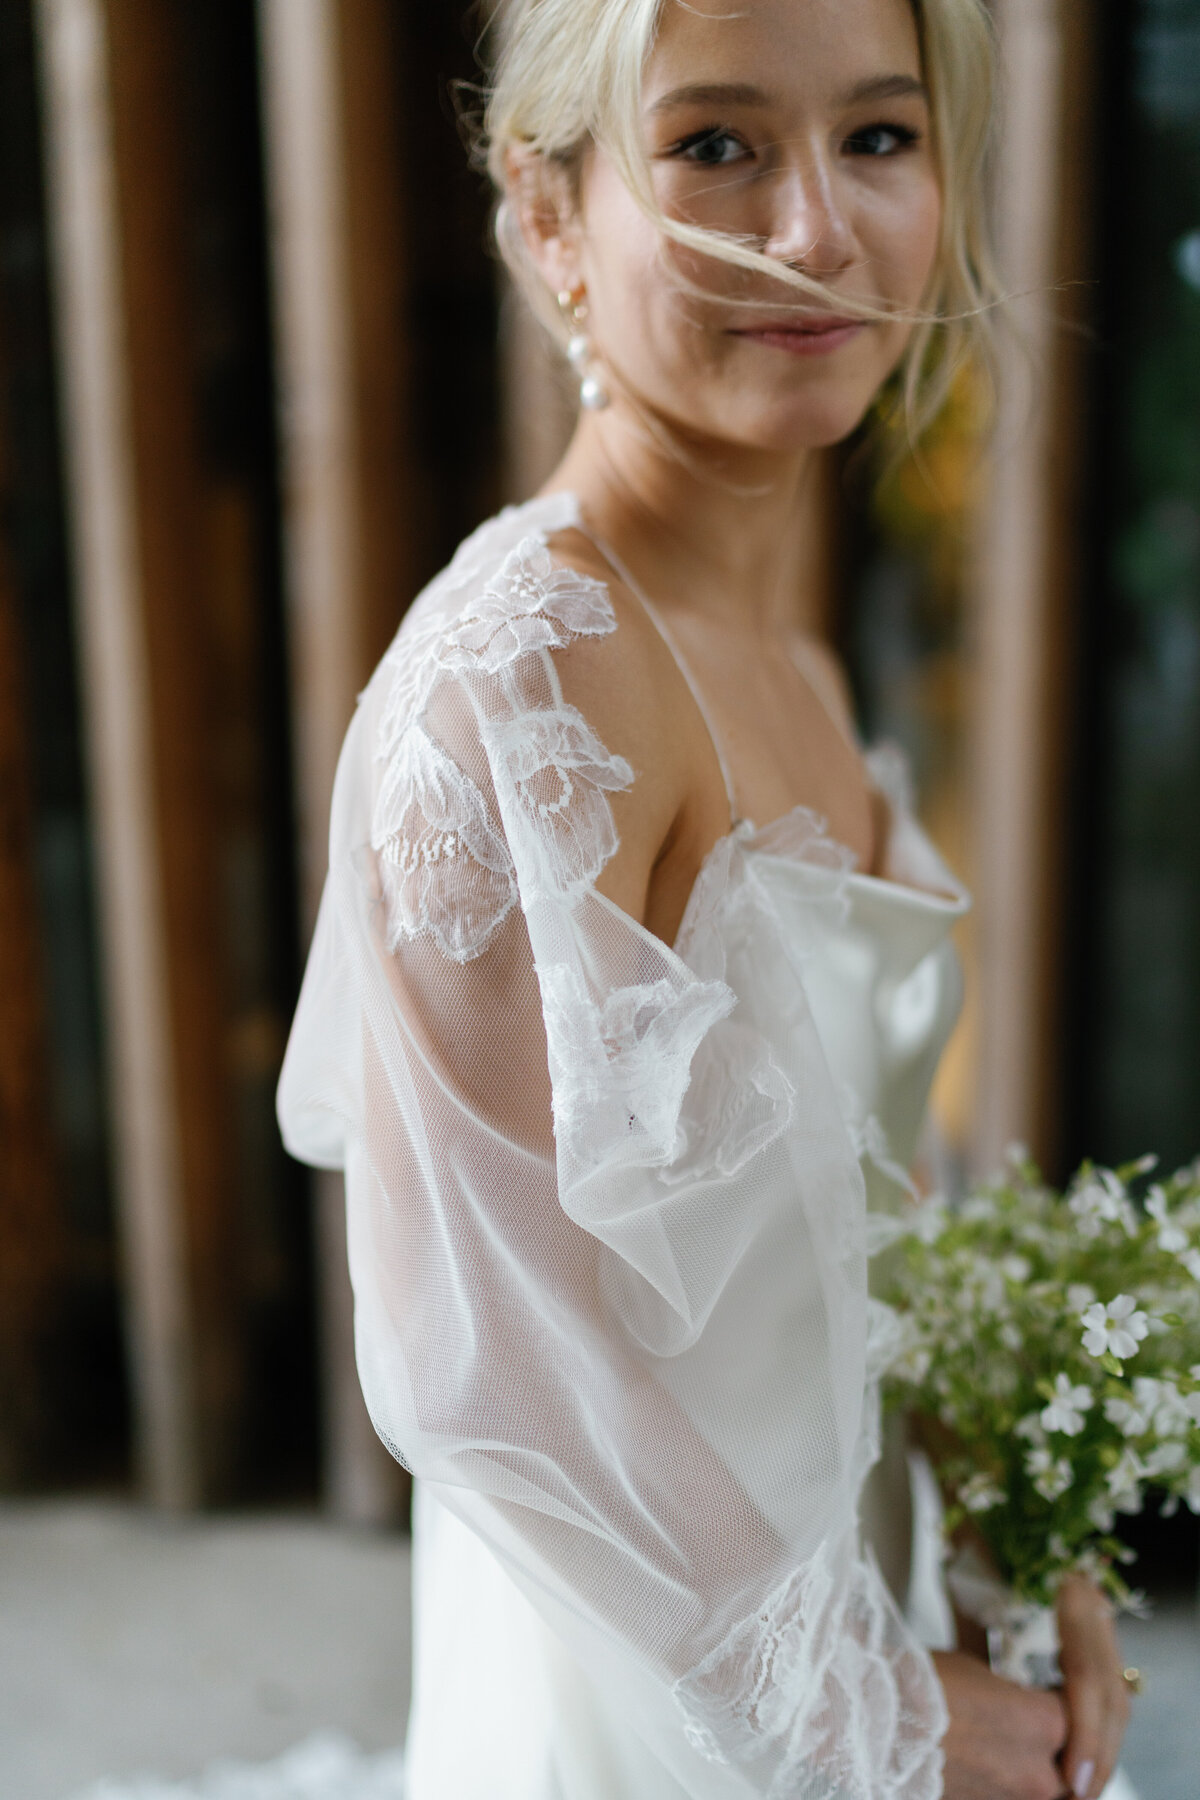 nyc-lace-bridal-veil-timeless-wedding-gown-minimal-bouquet-sarah-brehant-events